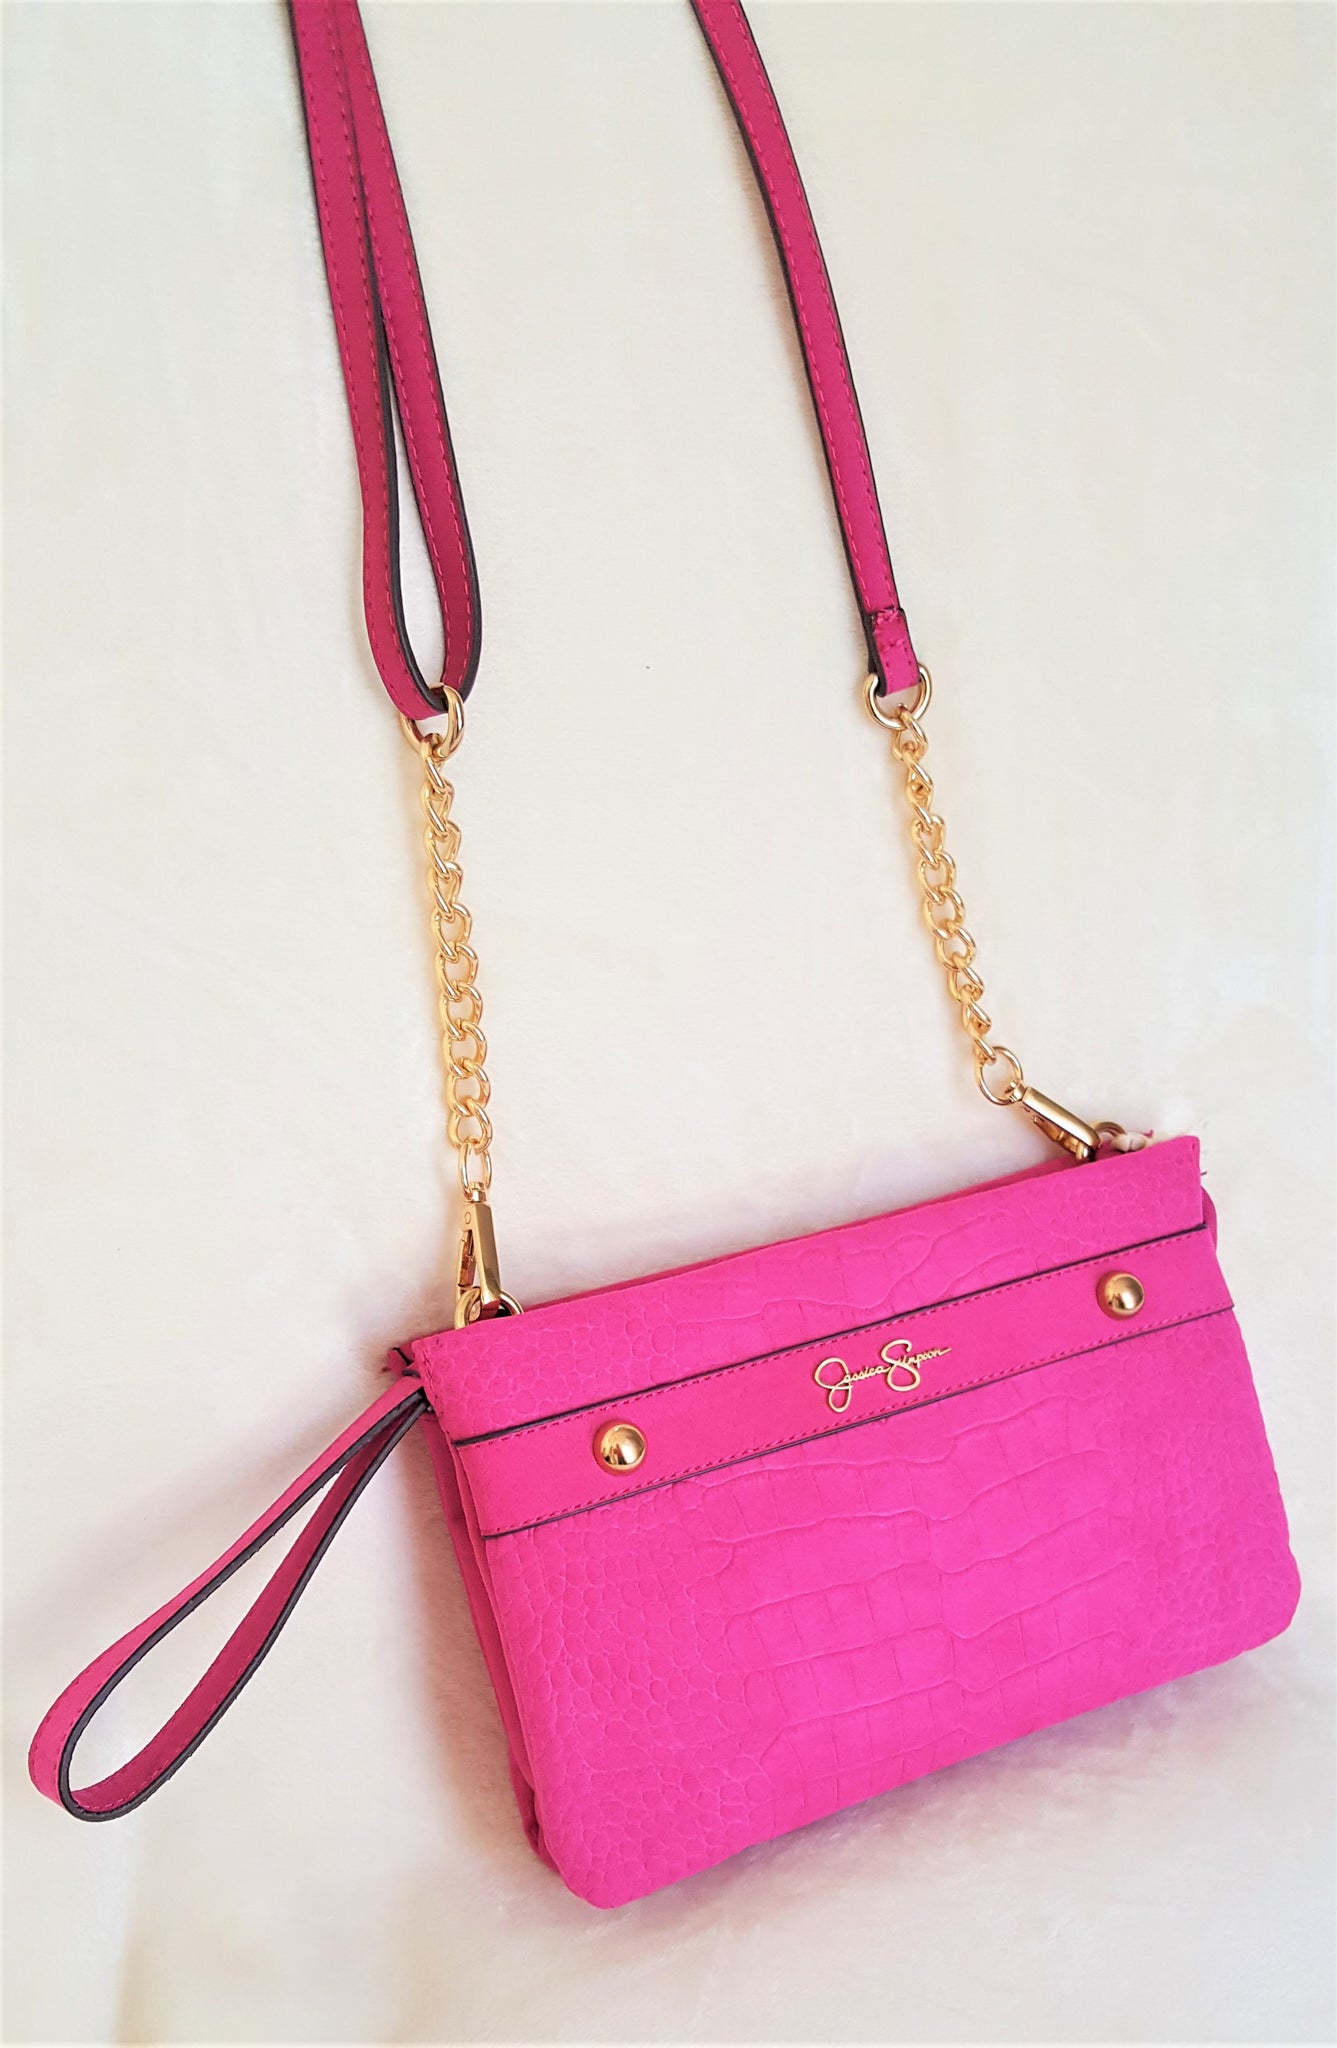 Jessica Simpson Pink Bag with subtle animal print | Pink bag, Jessica  simpson bags, Bags